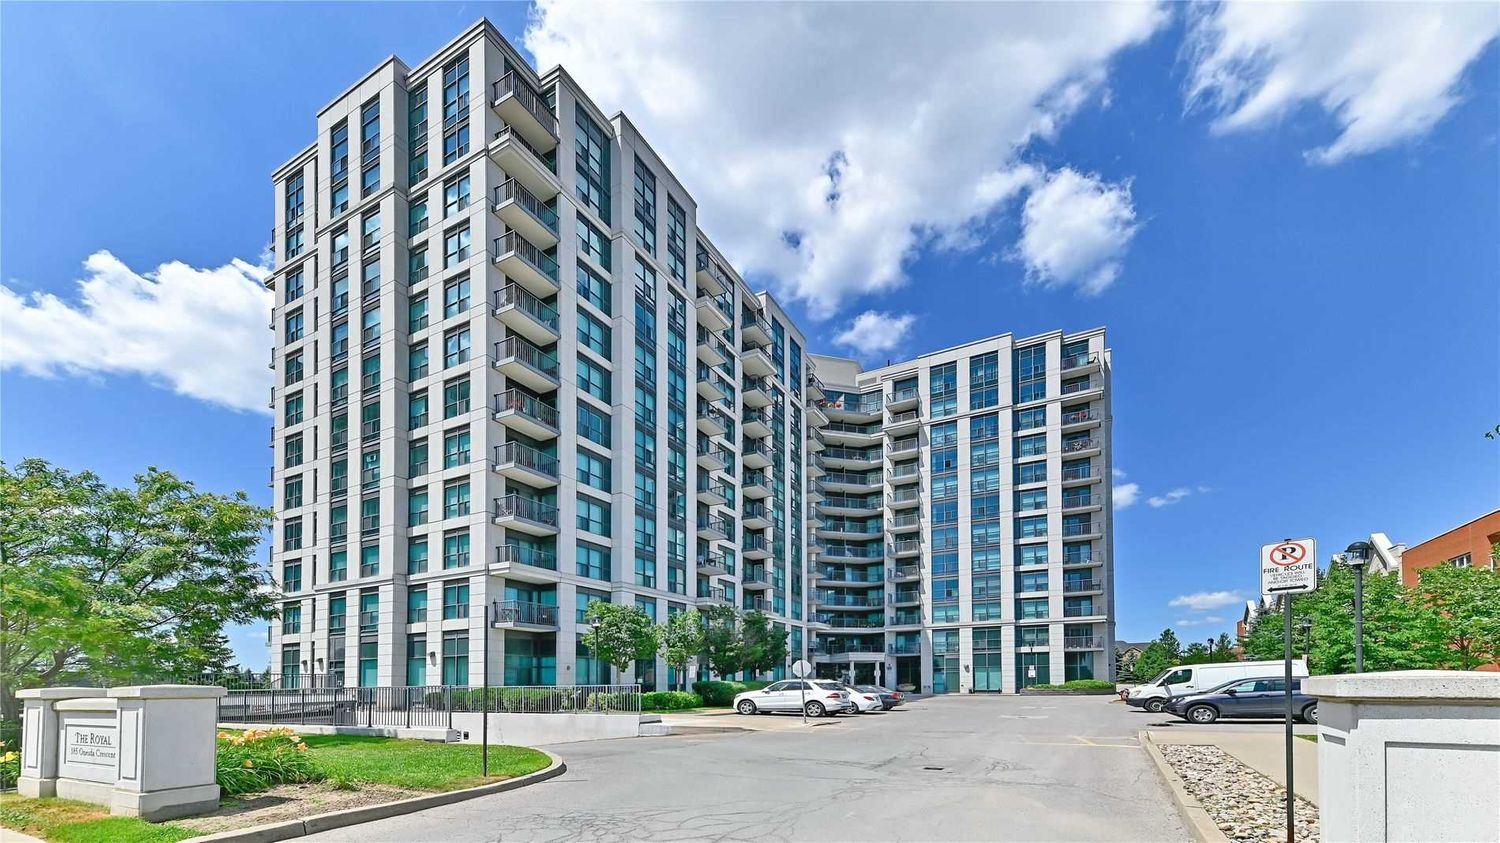 185 Oneida Crescent. The Royal at Bayview Glen Condos is located in  Richmond Hill, Toronto - image #1 of 3